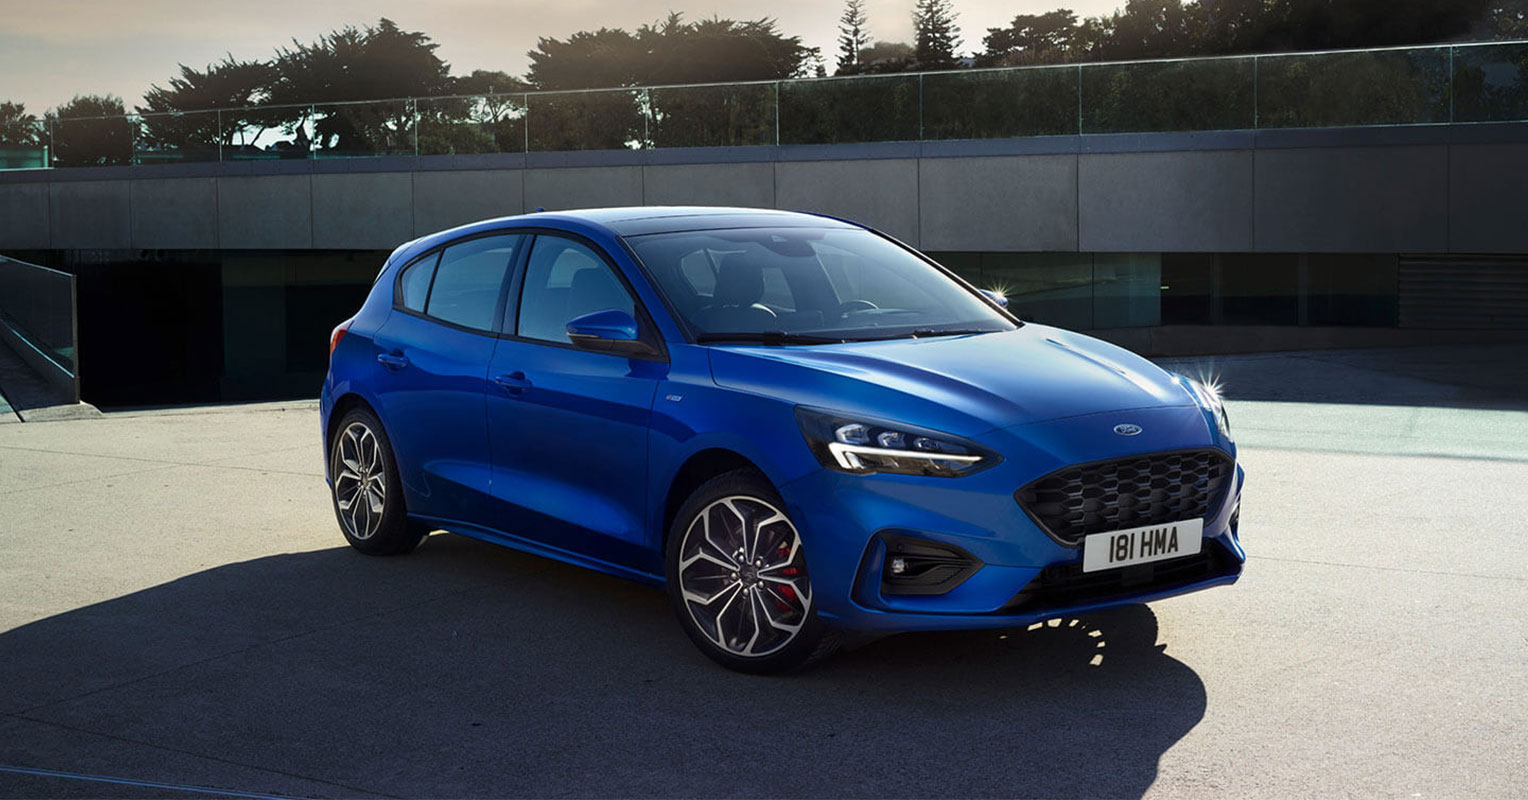 Frontal del Ford Focus 2018